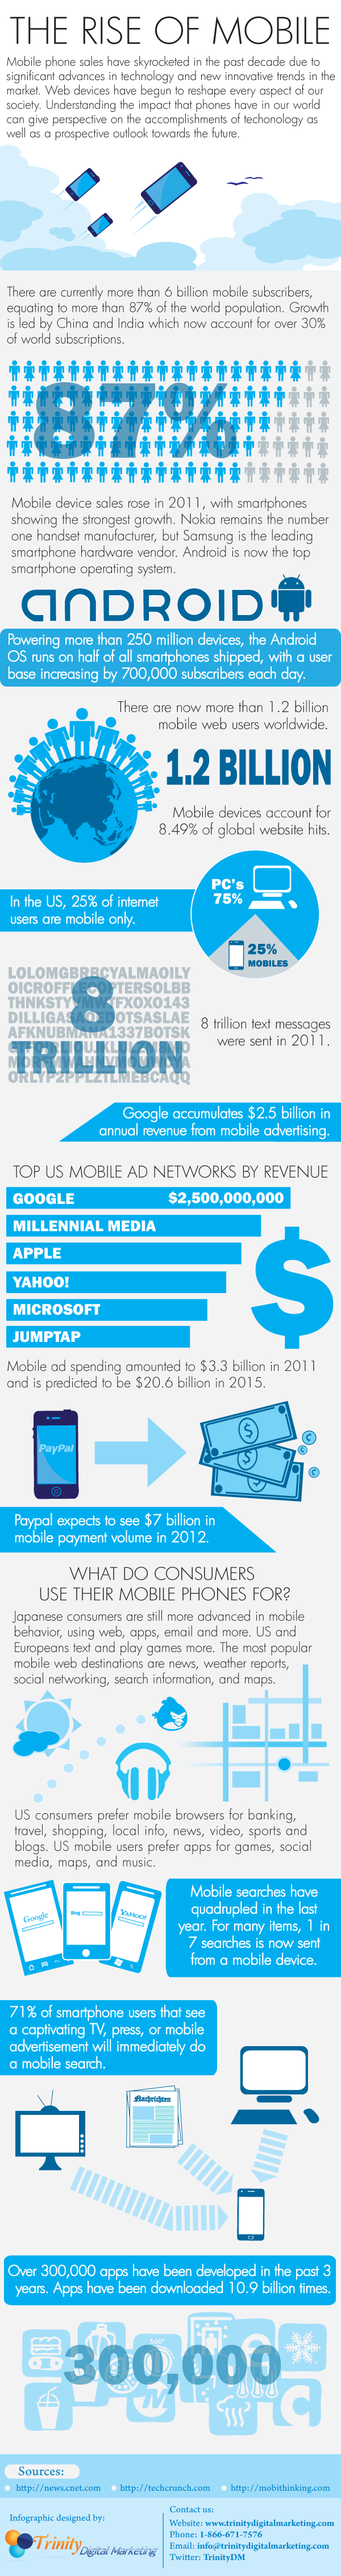 the-rise-of-mobile-infographic